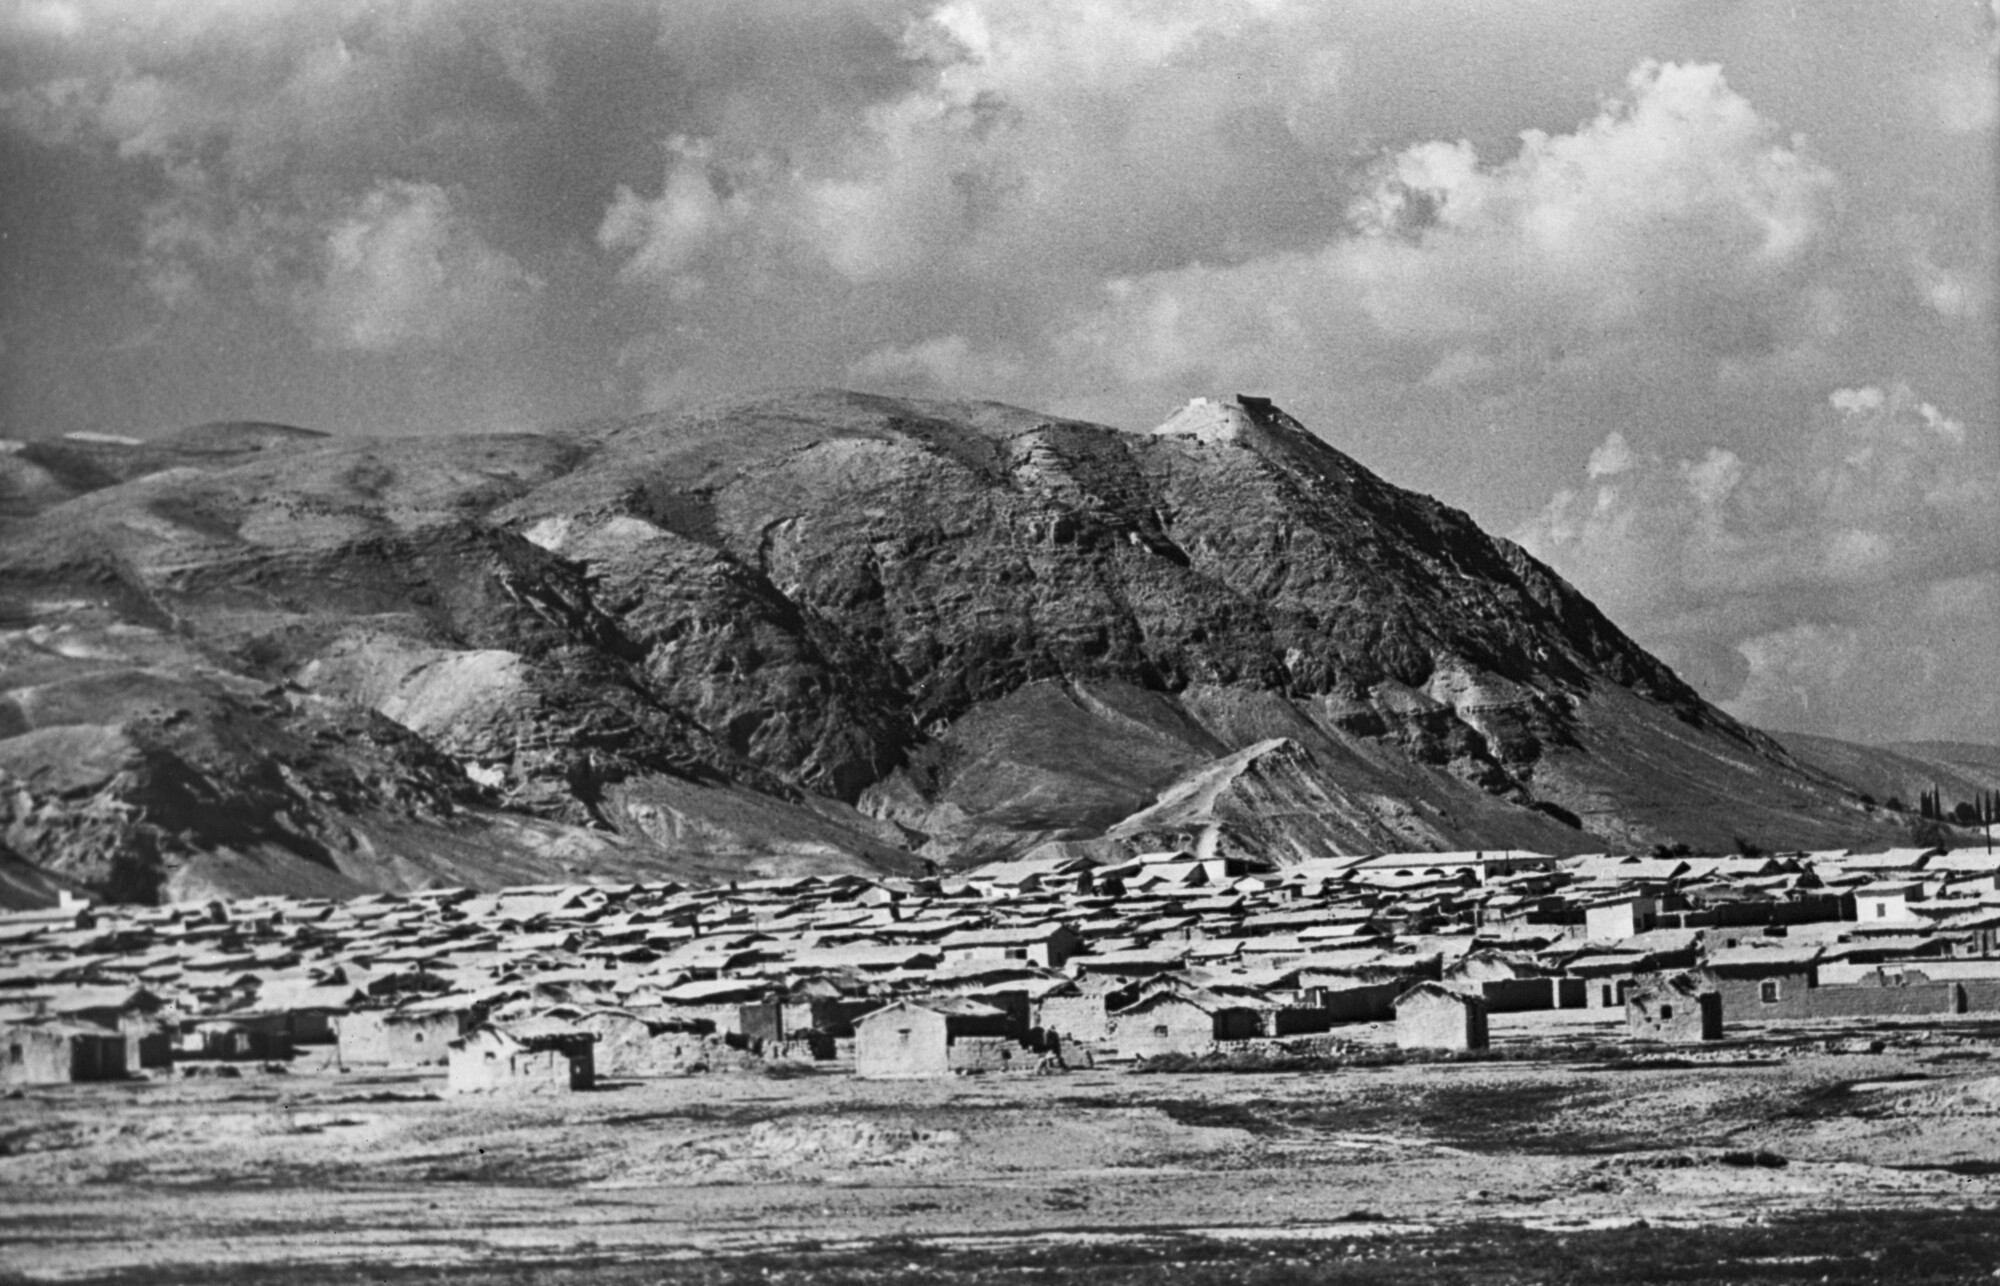 Refugee camp for Palestines in Jericho in 1950s